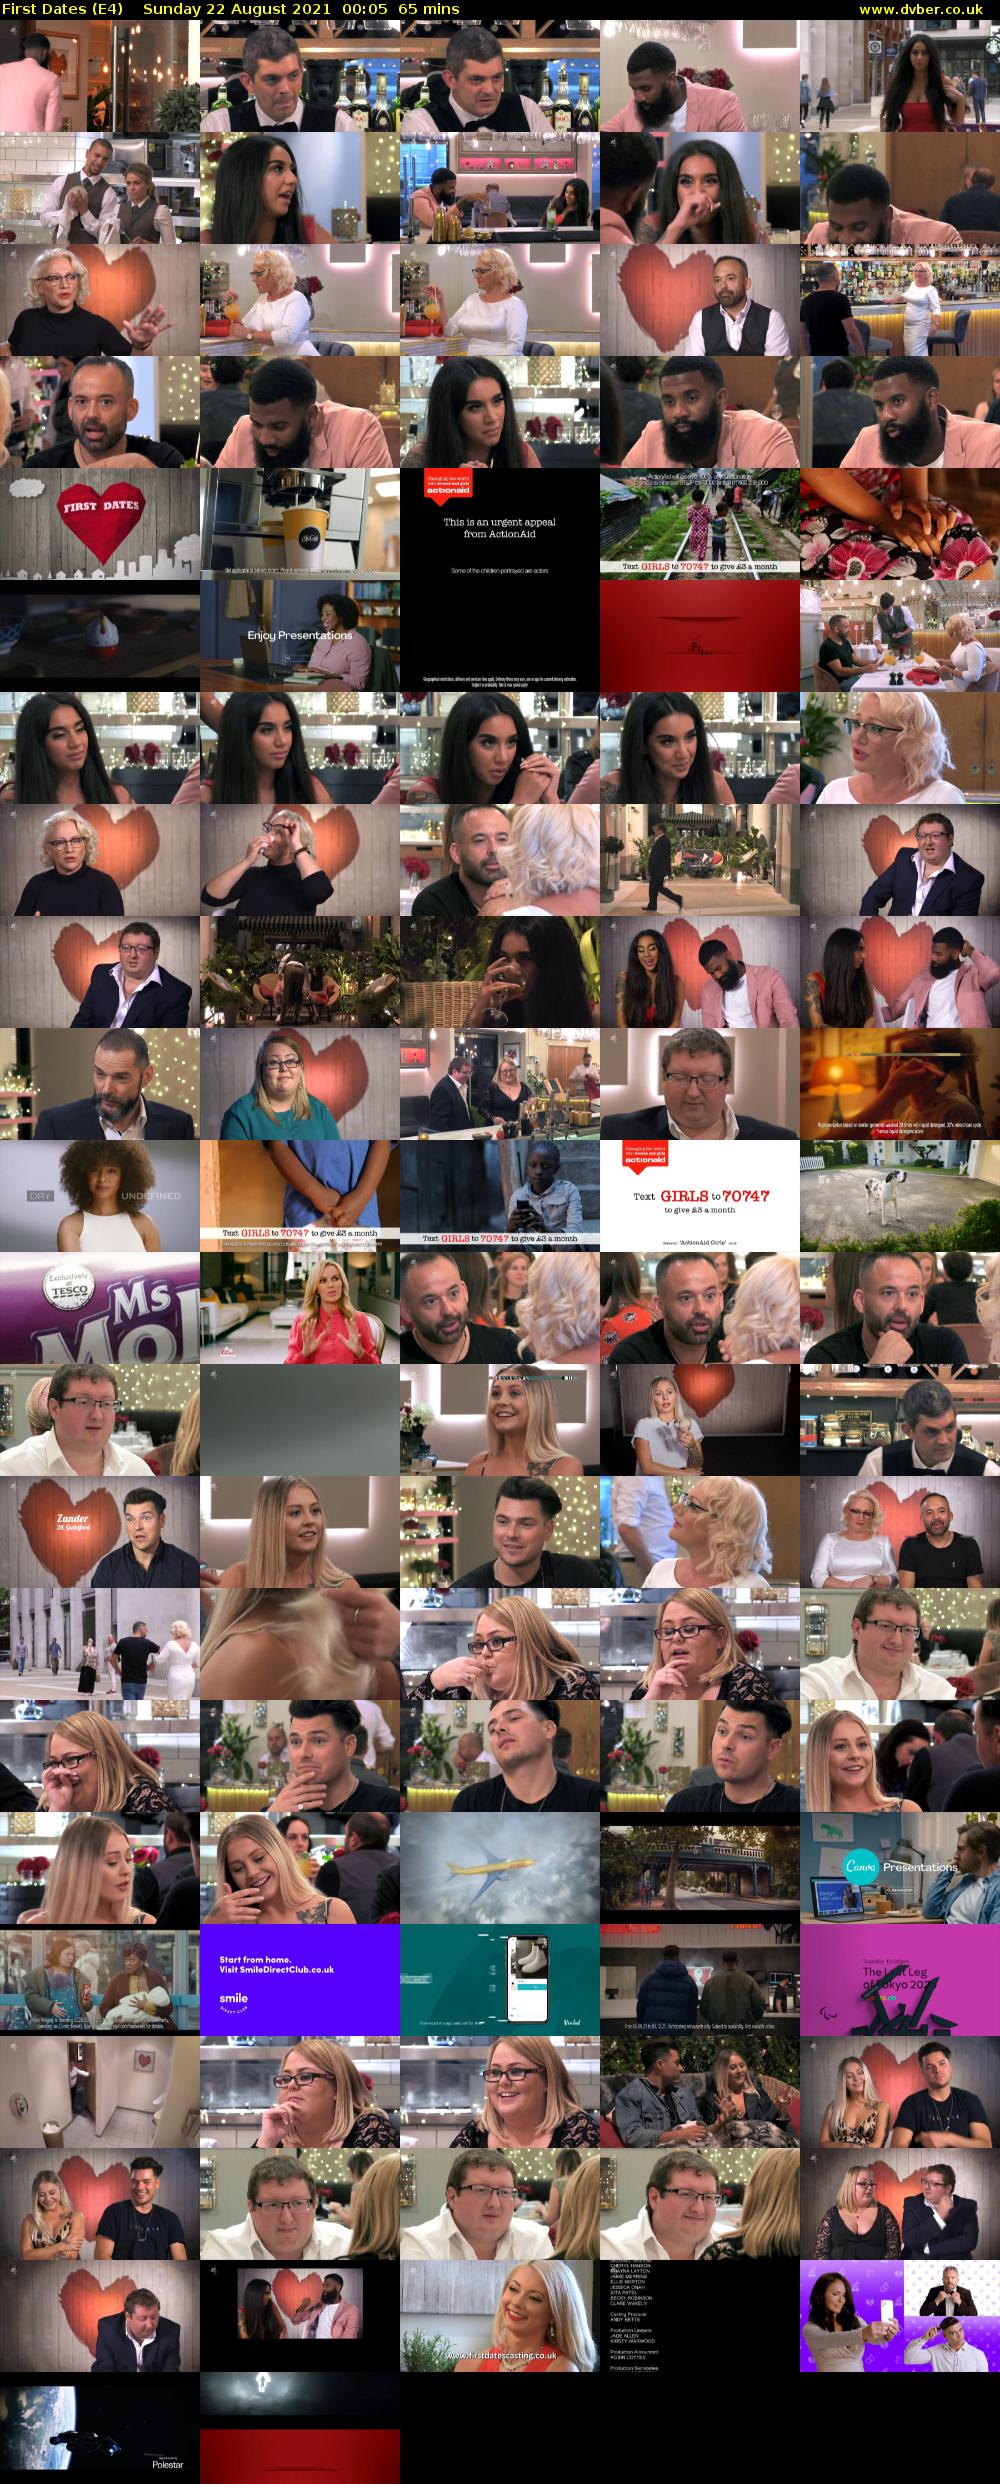 First Dates (E4) Sunday 22 August 2021 00:05 - 01:10